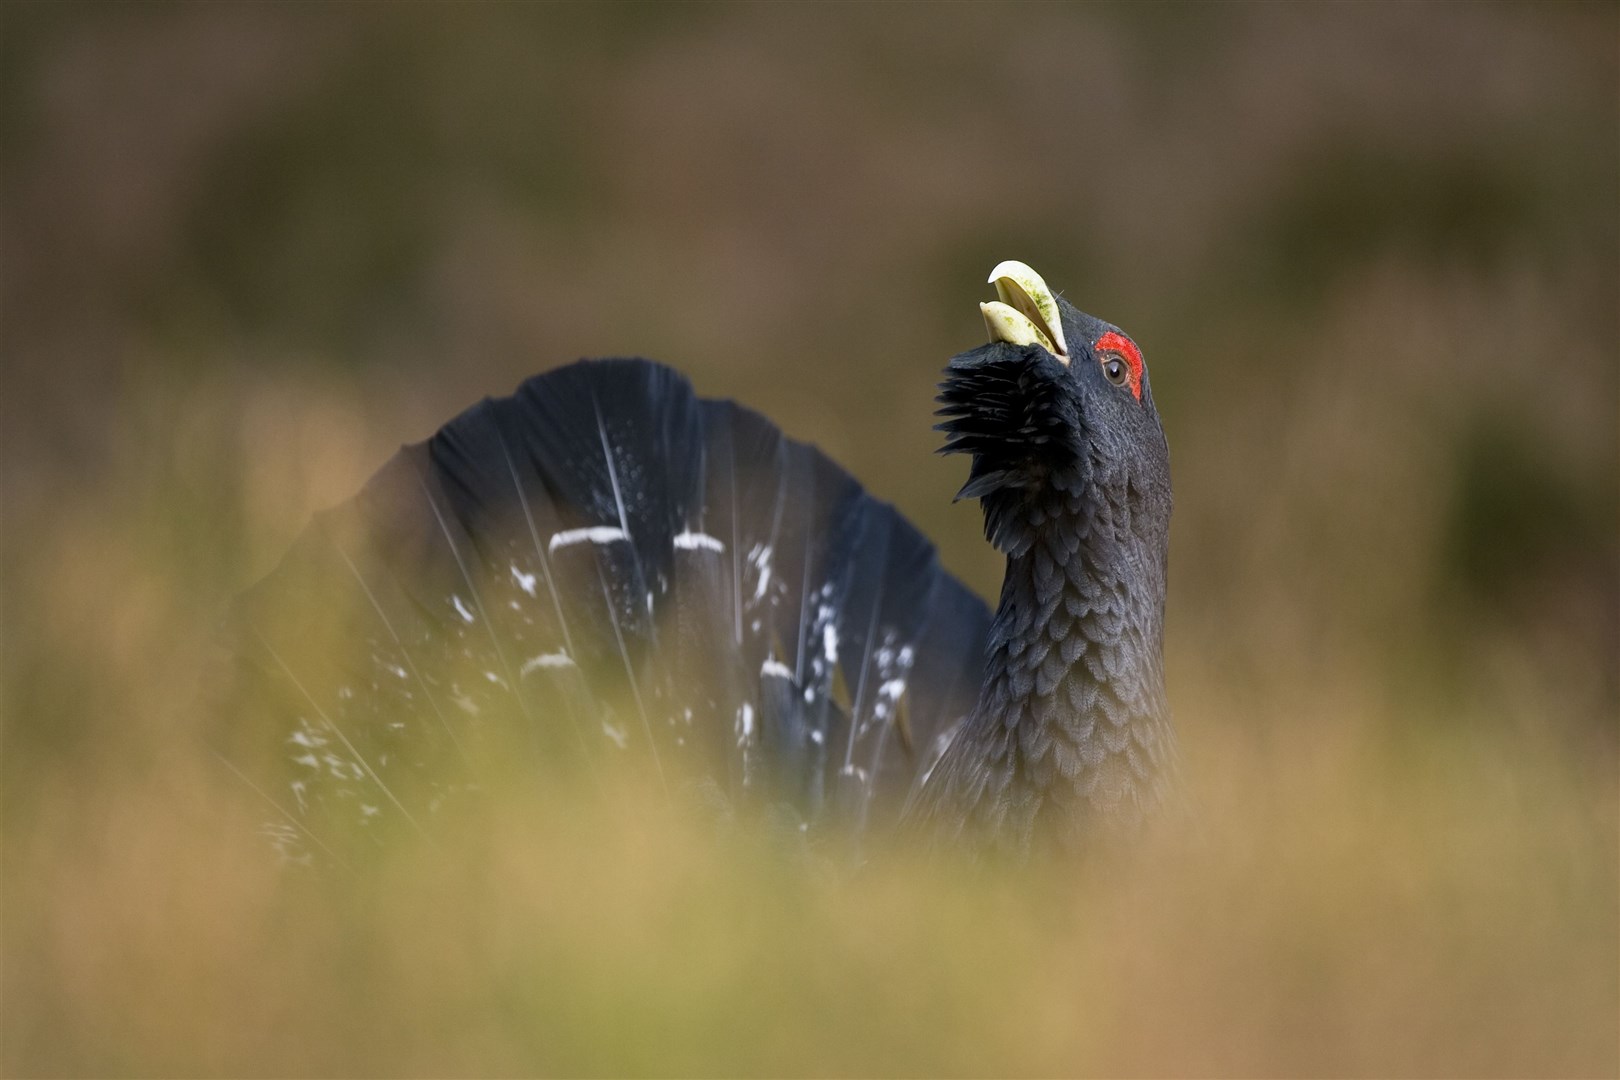 Capercaillie (Tetrao urogallus) male displaying, Scotland.